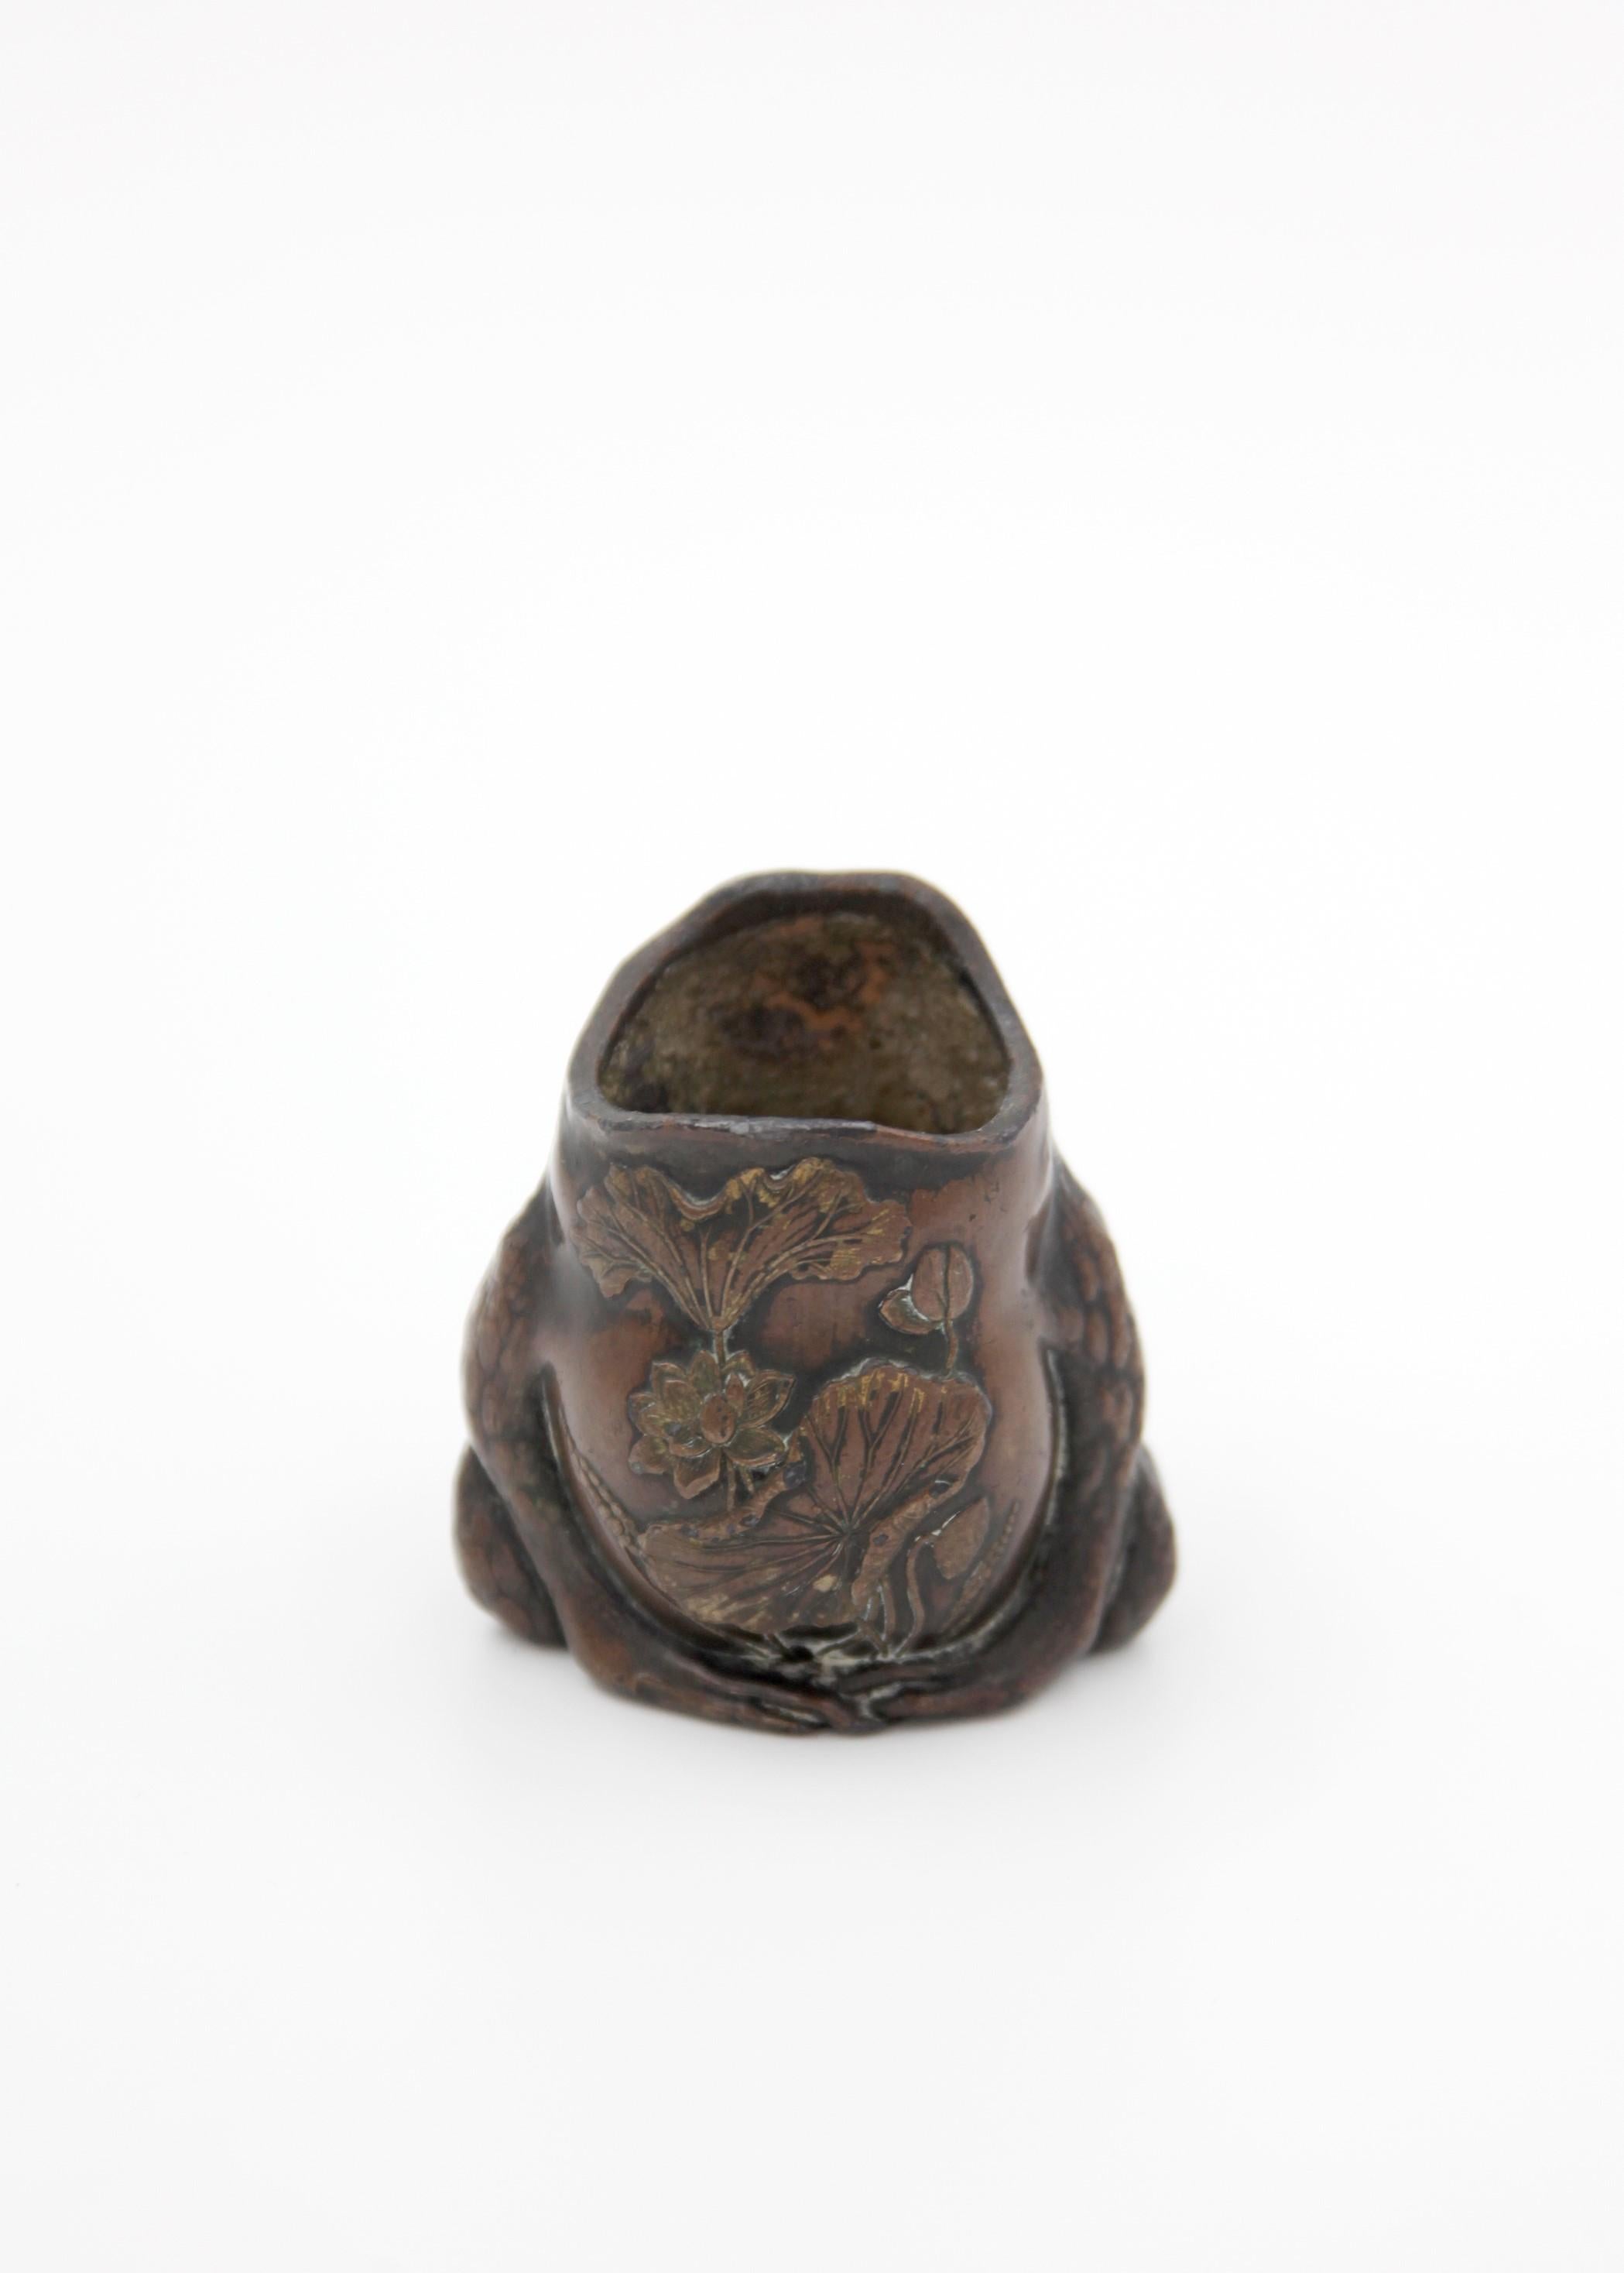 Enjoy a serving of sheer whimsy with this unique Art Nouveau bronze spoon warmer designed as a toad. Reflecting a unique aspect of late 19th to early 20th-century artistry, it acts as a fun conversation starter as well as an intriguing piece of